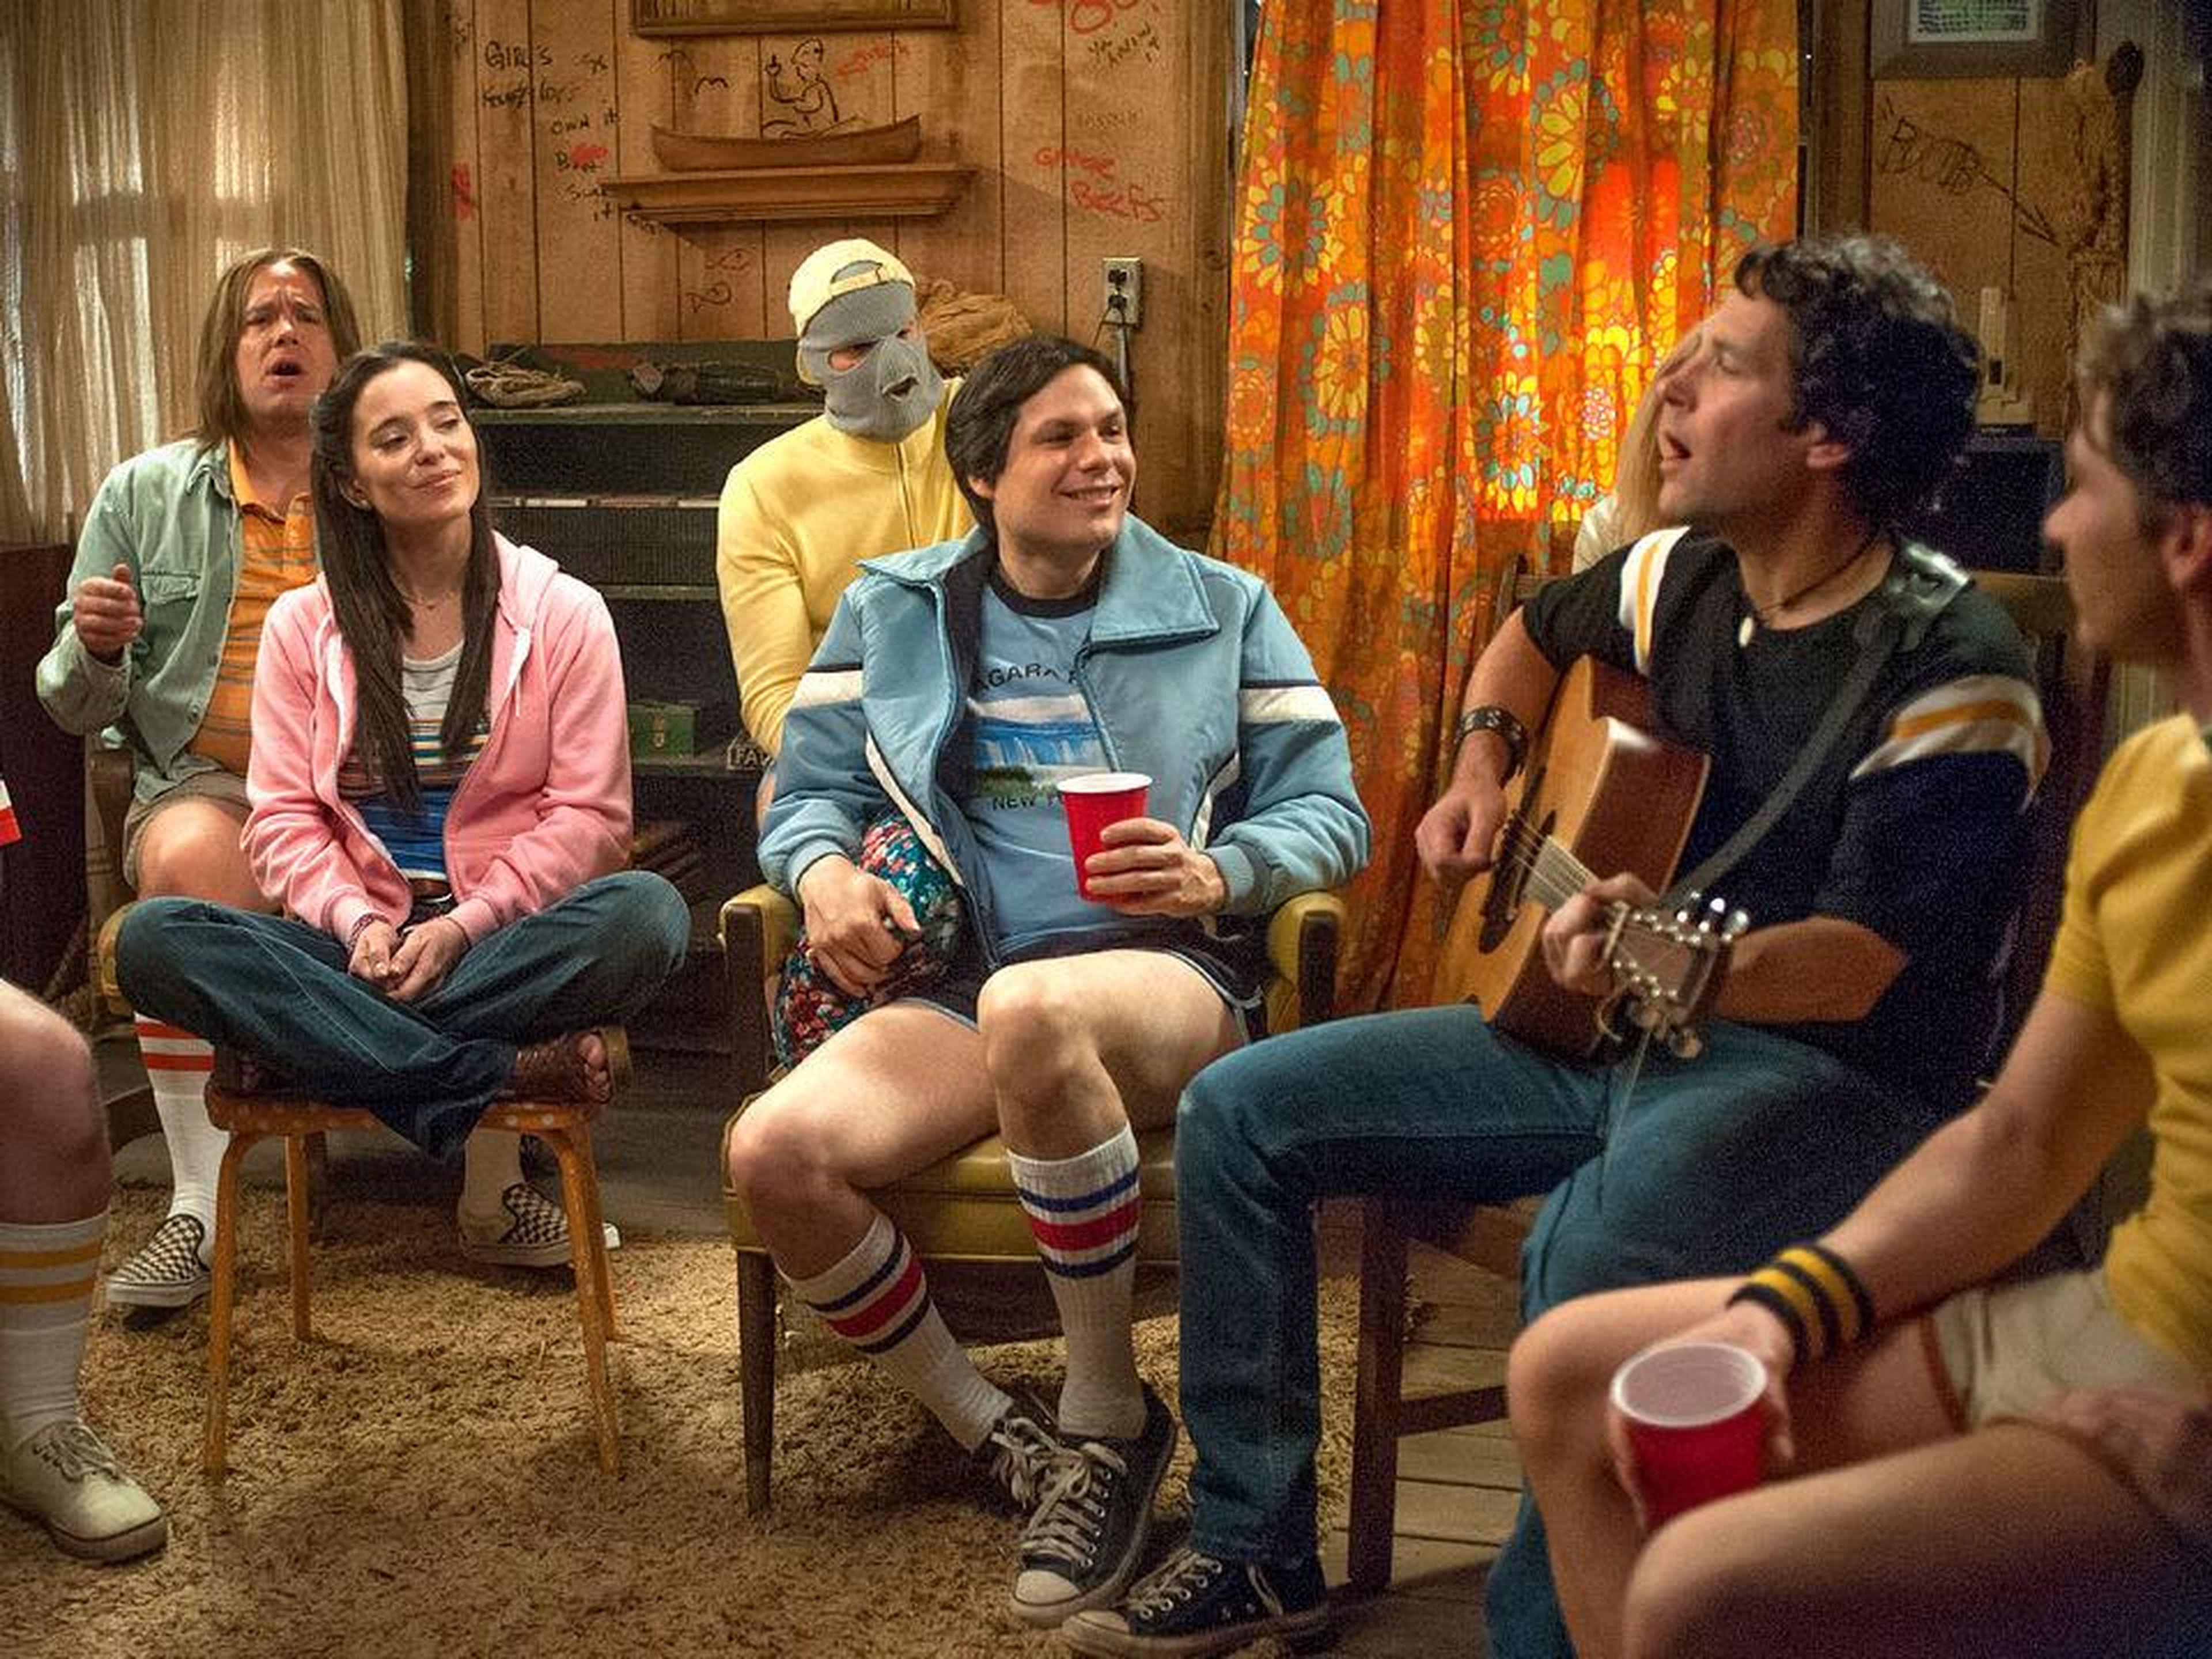 26. "Wet Hot American Summer: First Day of Camp" — 92%